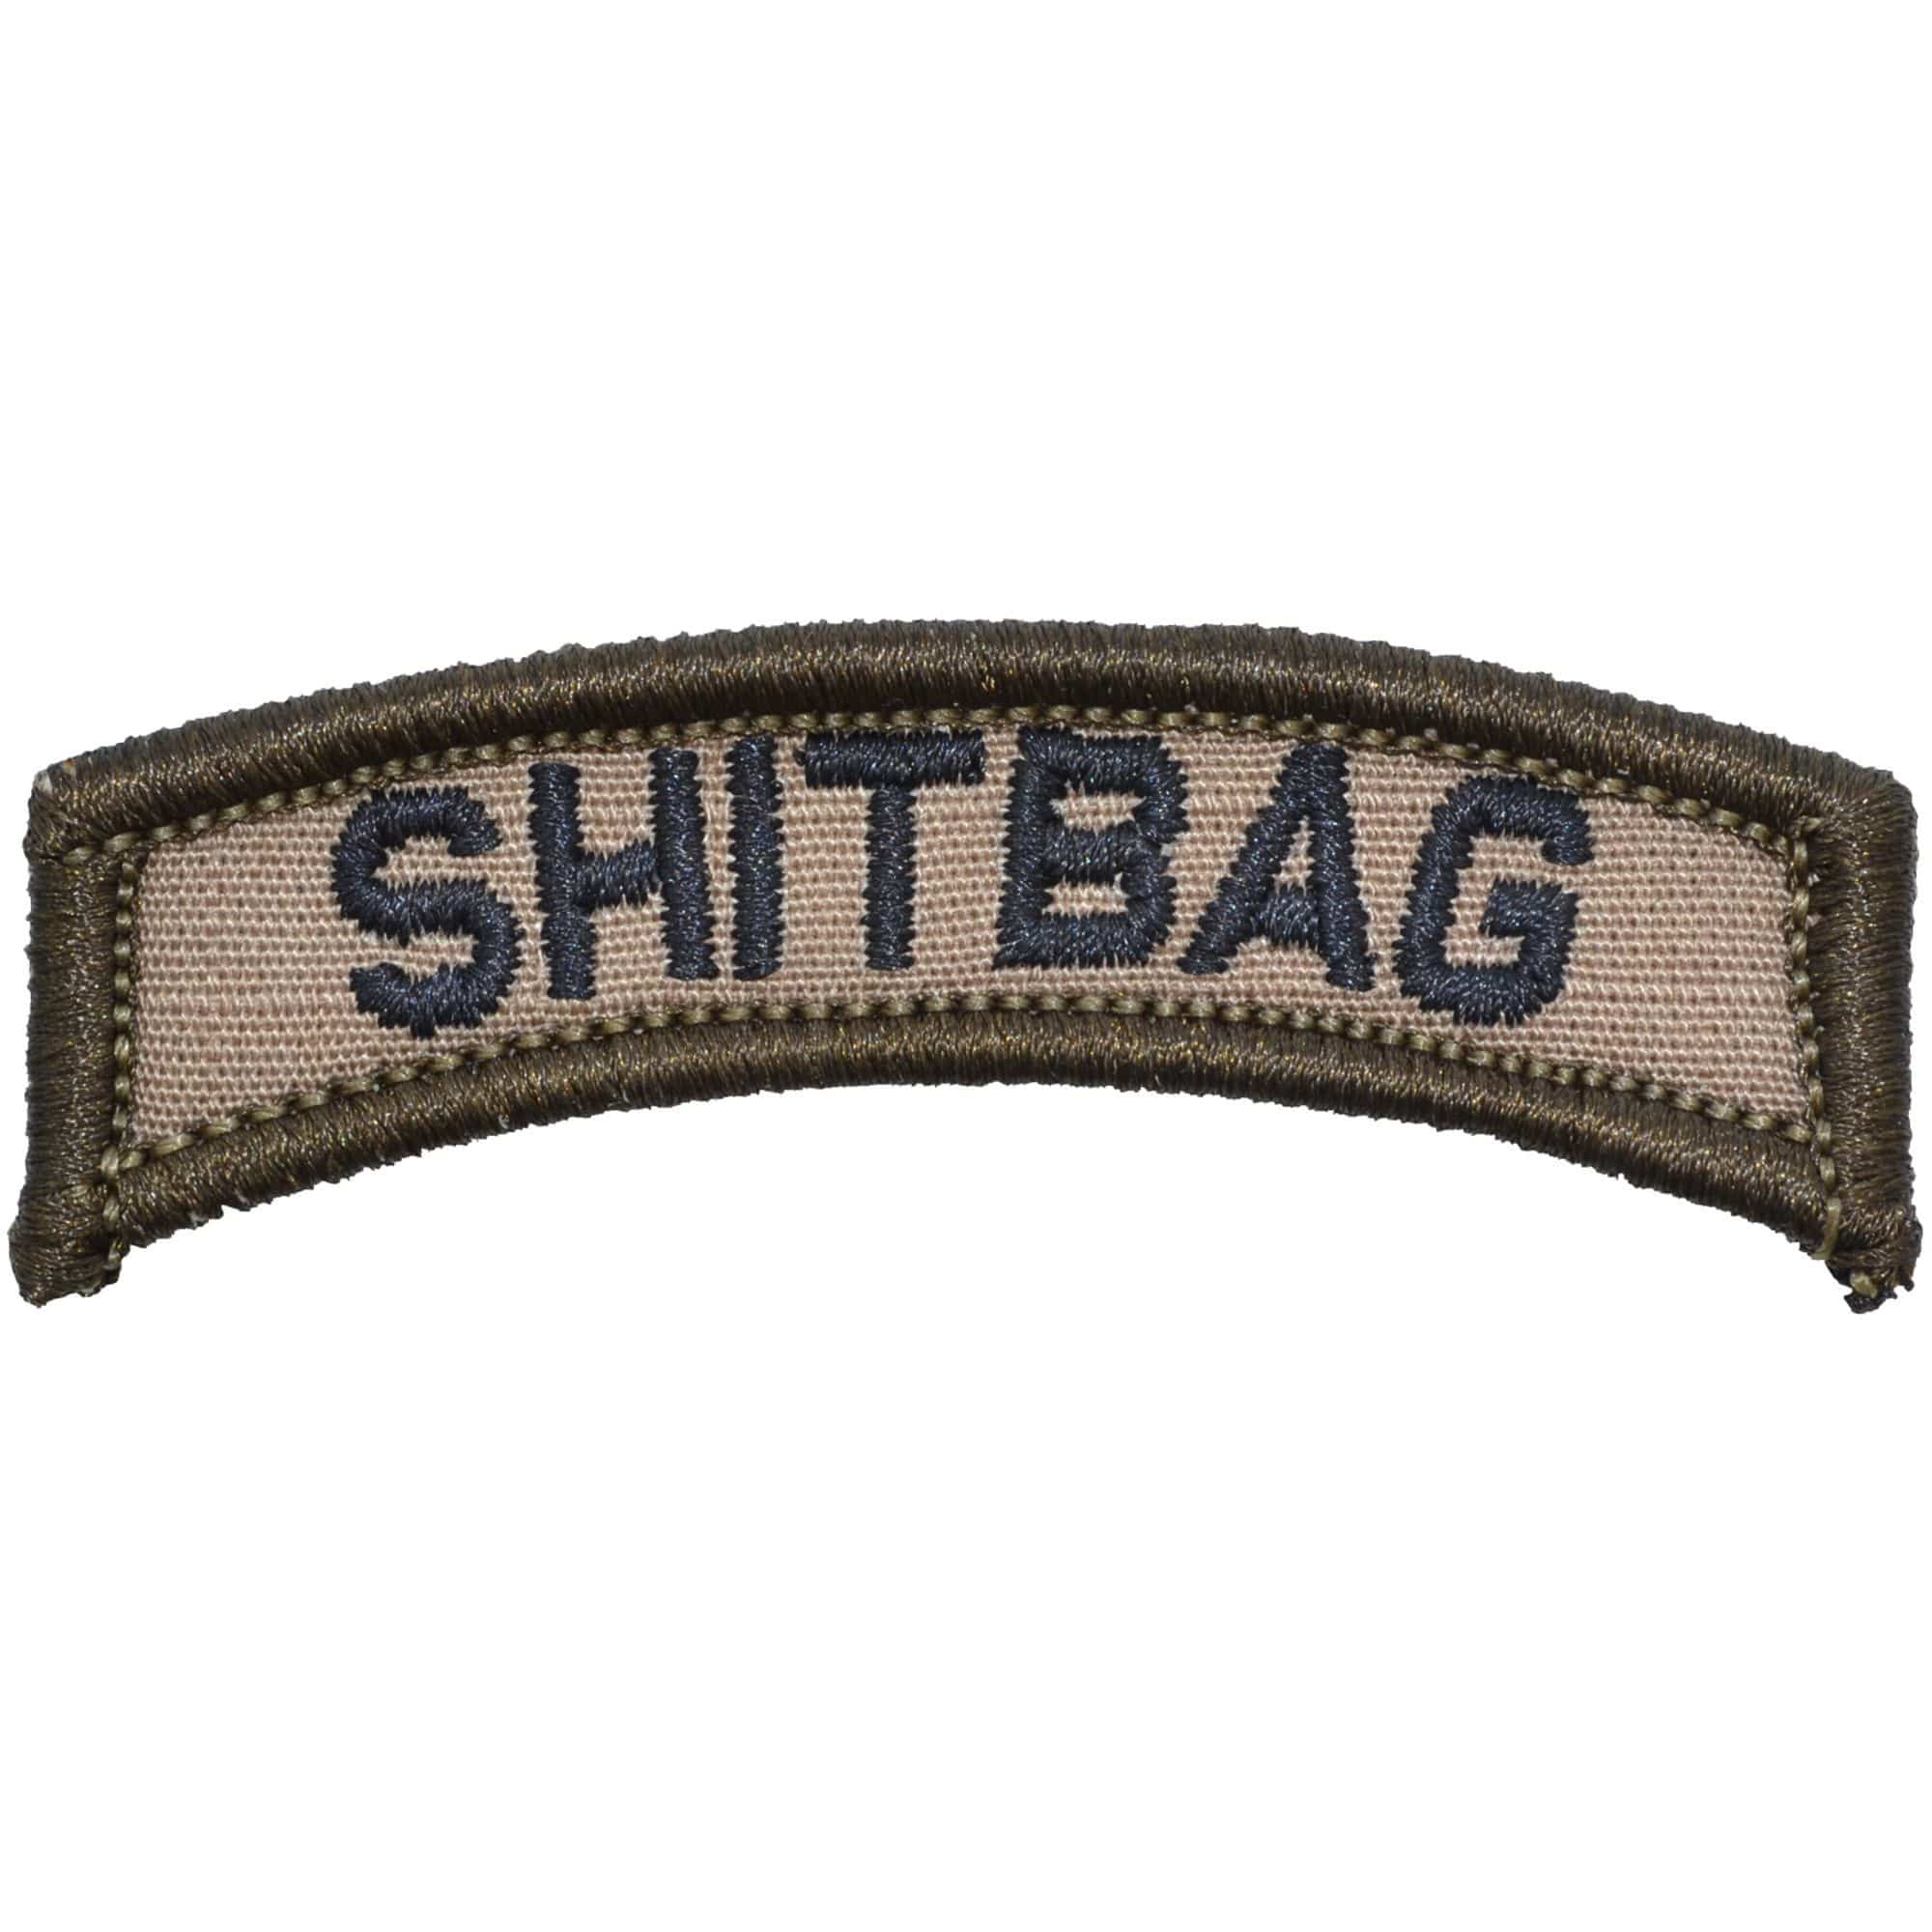 Tactical Gear Junkie Patches Coyote Brown w/ Black Shitbag Tab Patch